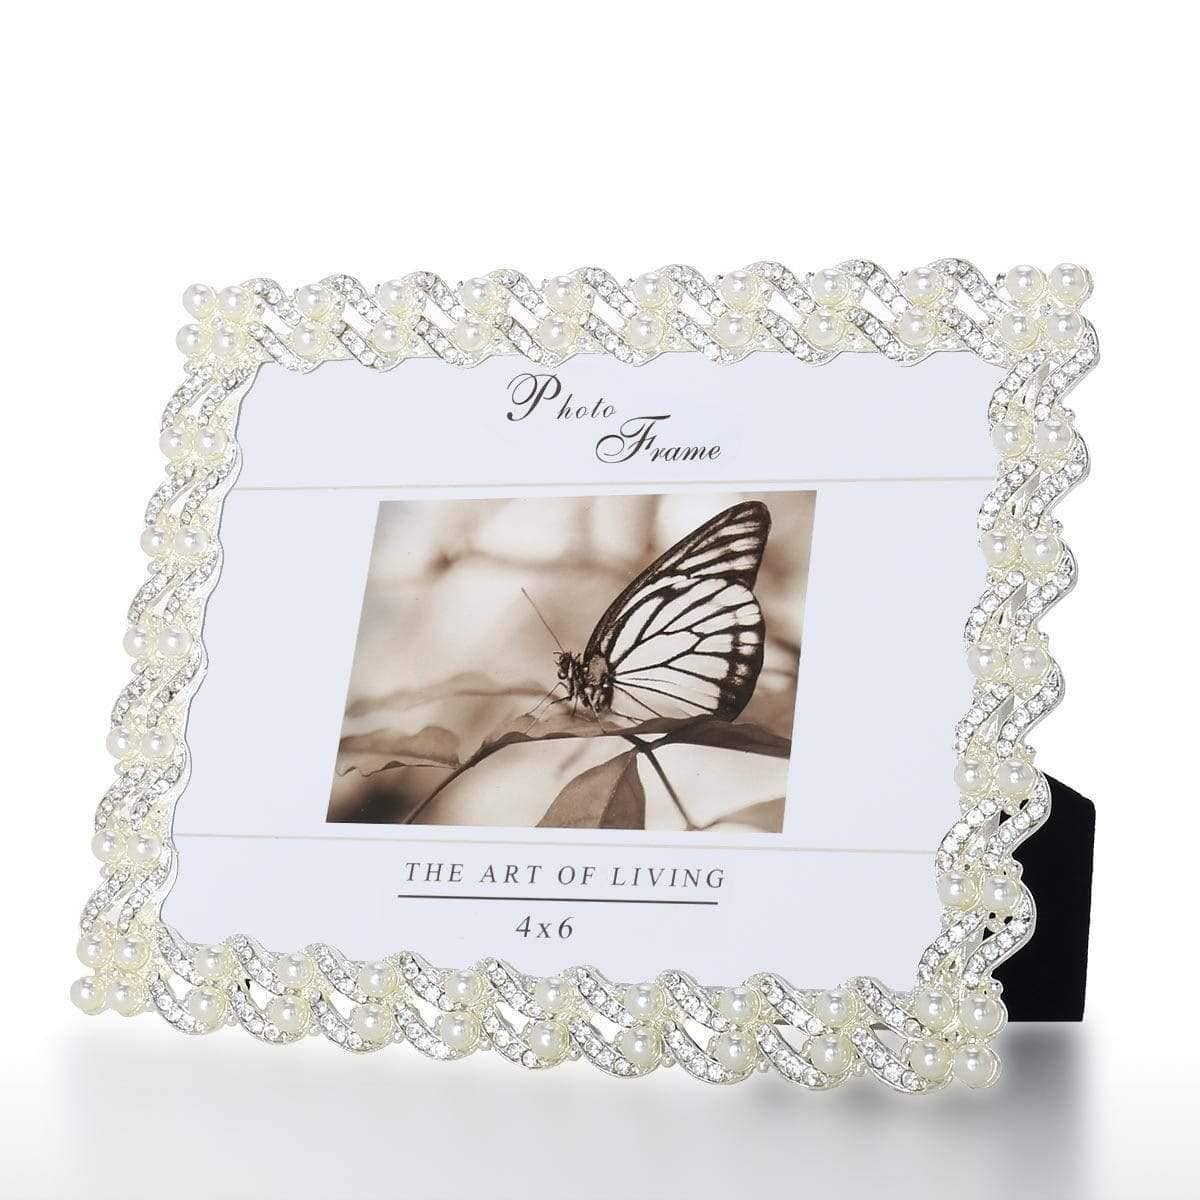 Synthetic Diamond Photo Picture Frame: Stylish and Elegant Home Decor